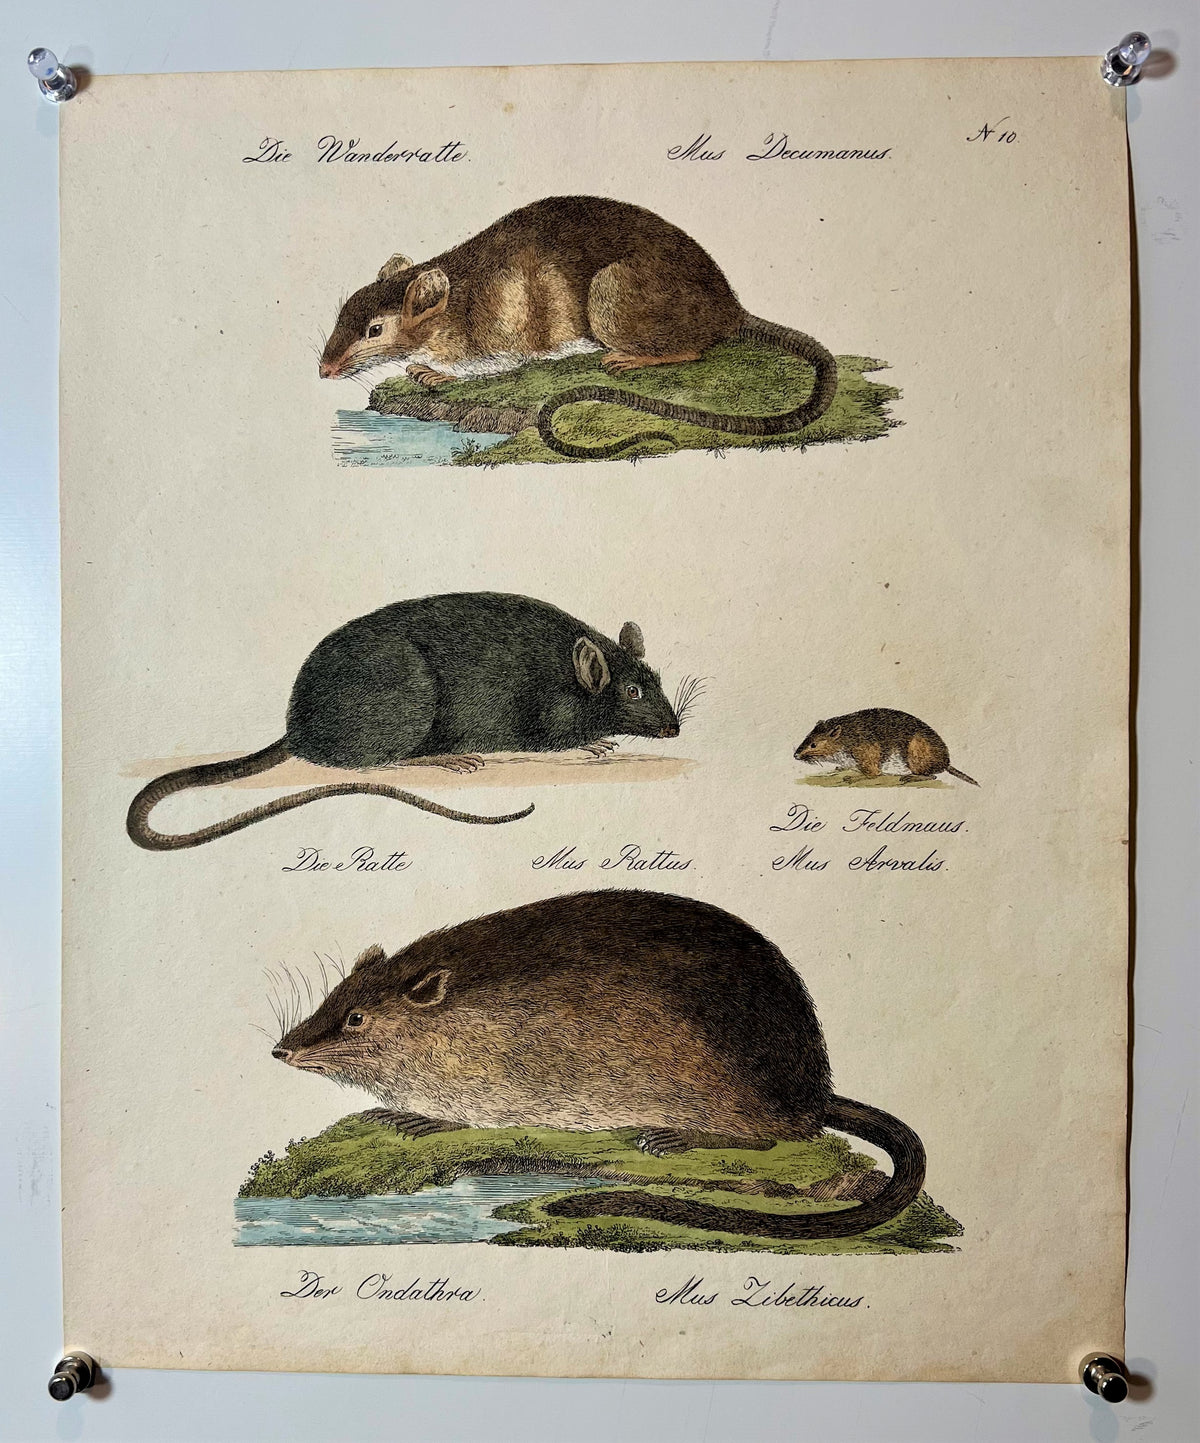 Brodtmann Rodents- Hand Colored Engraving - Authentic Vintage Antique Print